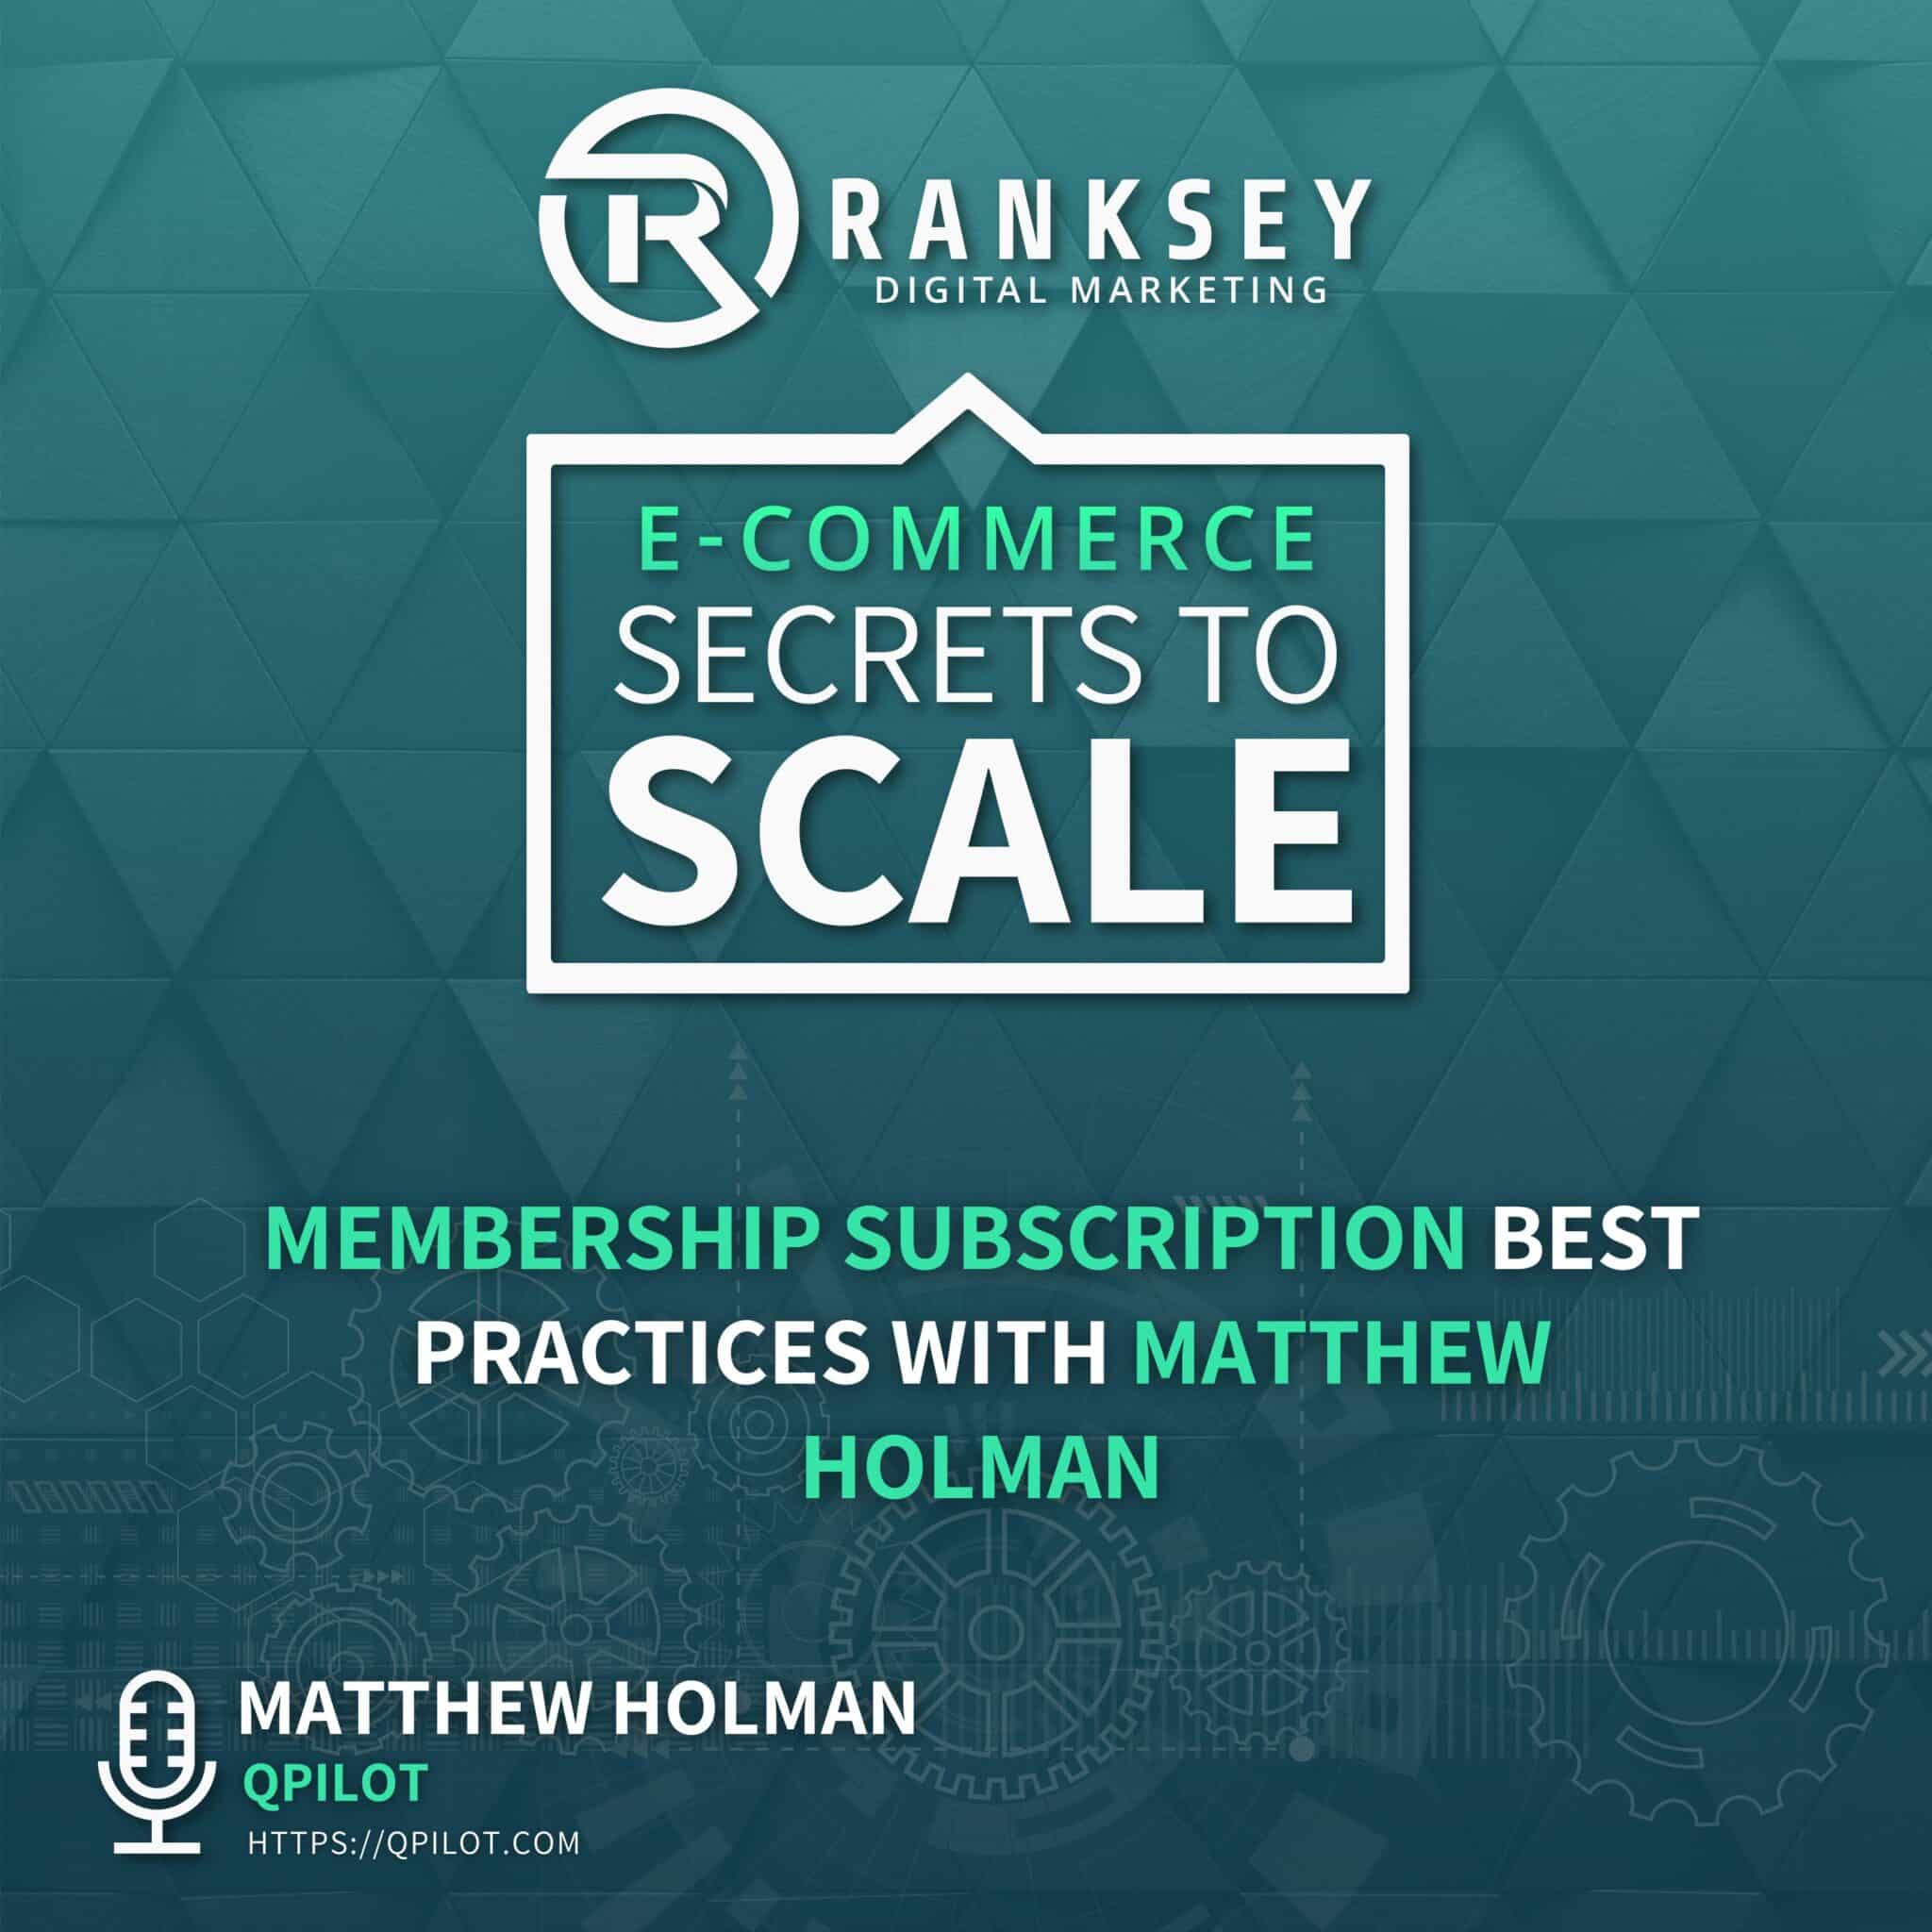 Membership Subscription Best Practices With Matthew Holman